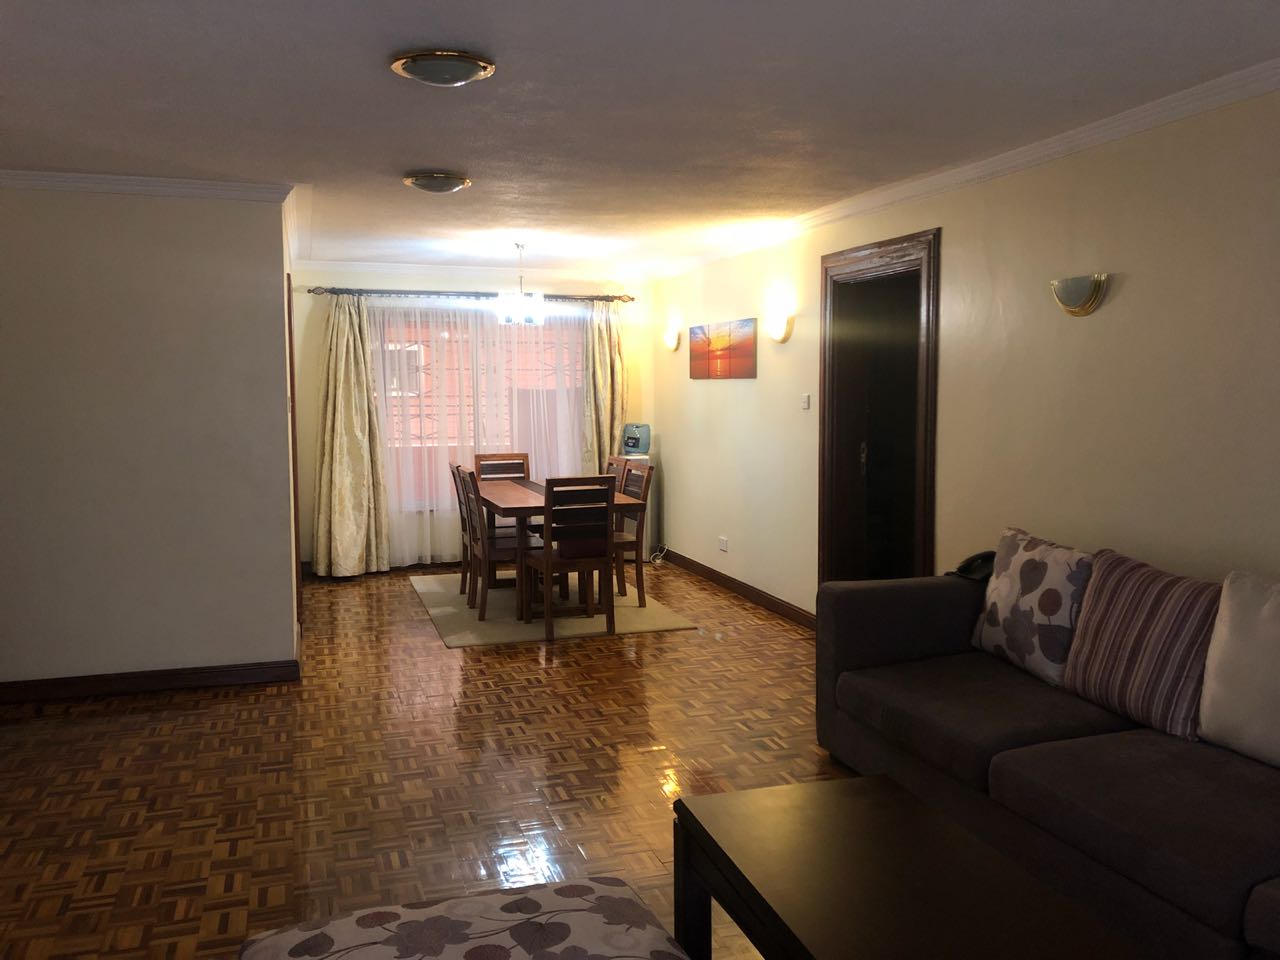 3 Bedroom Fully Furnished Apartment Located in Kilimani, Off Lenana Road, To Let at Ksh150k (2)